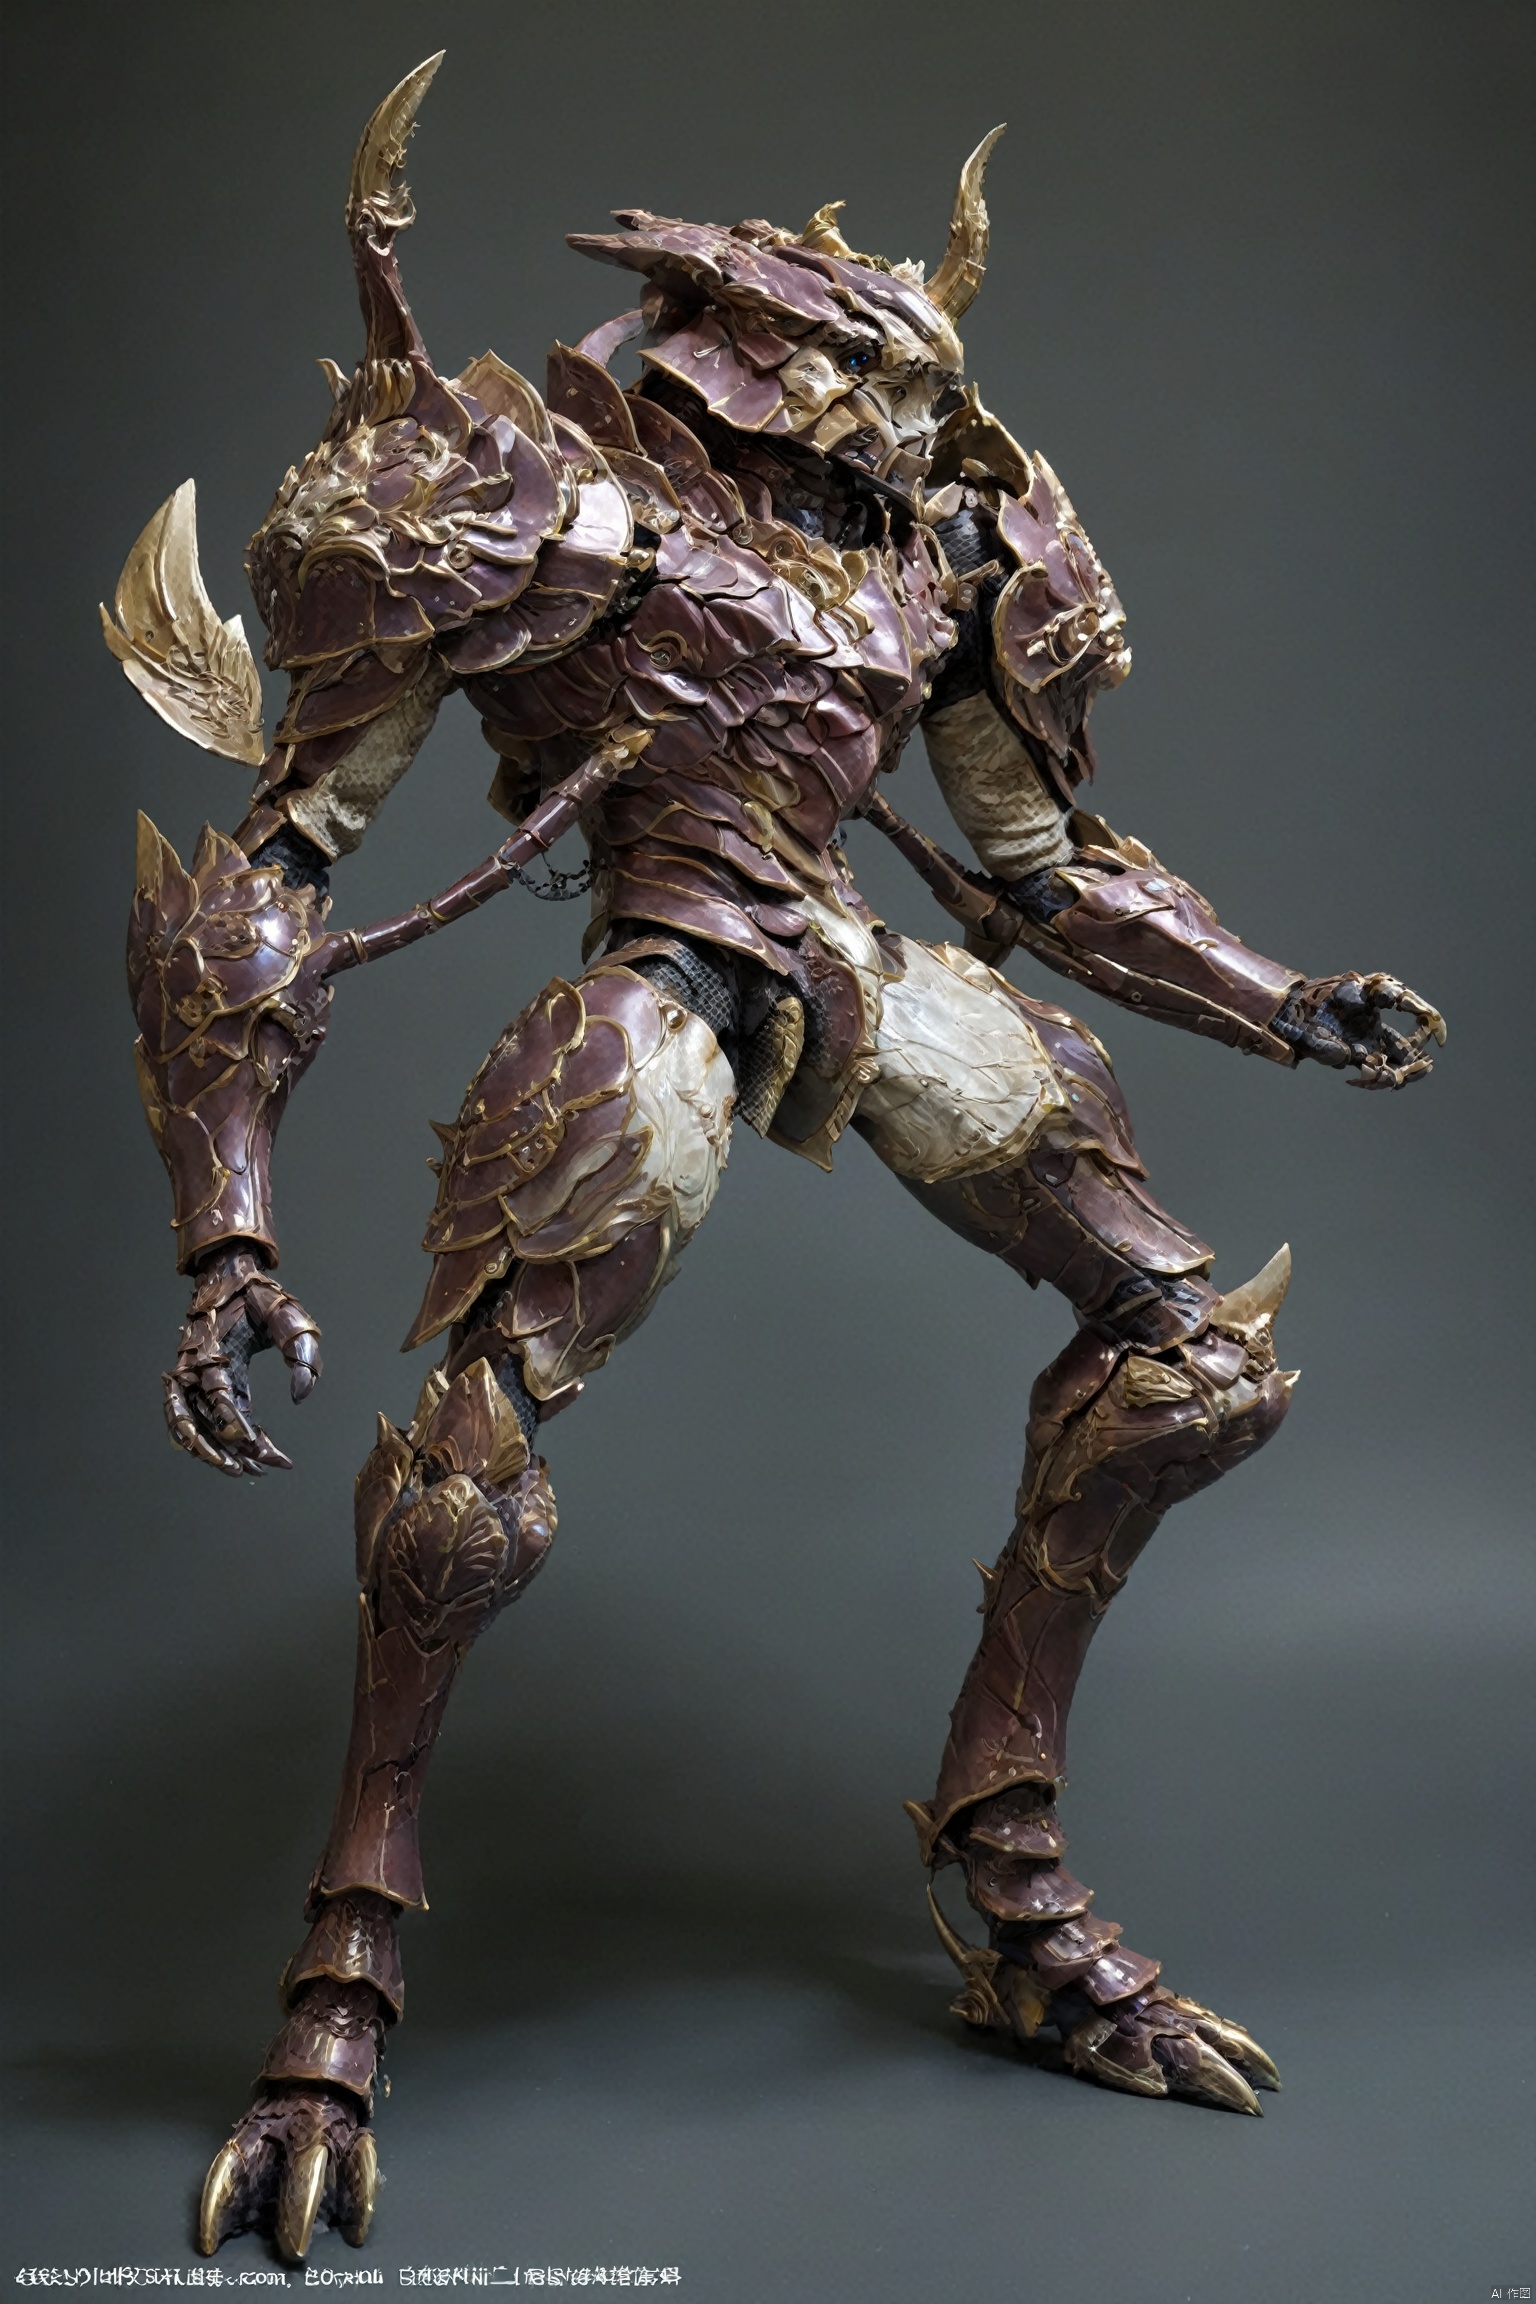  absurdres,incredibly absurdres,reality,realistic,full_shot, Armor_Partial mech, Strange animals,